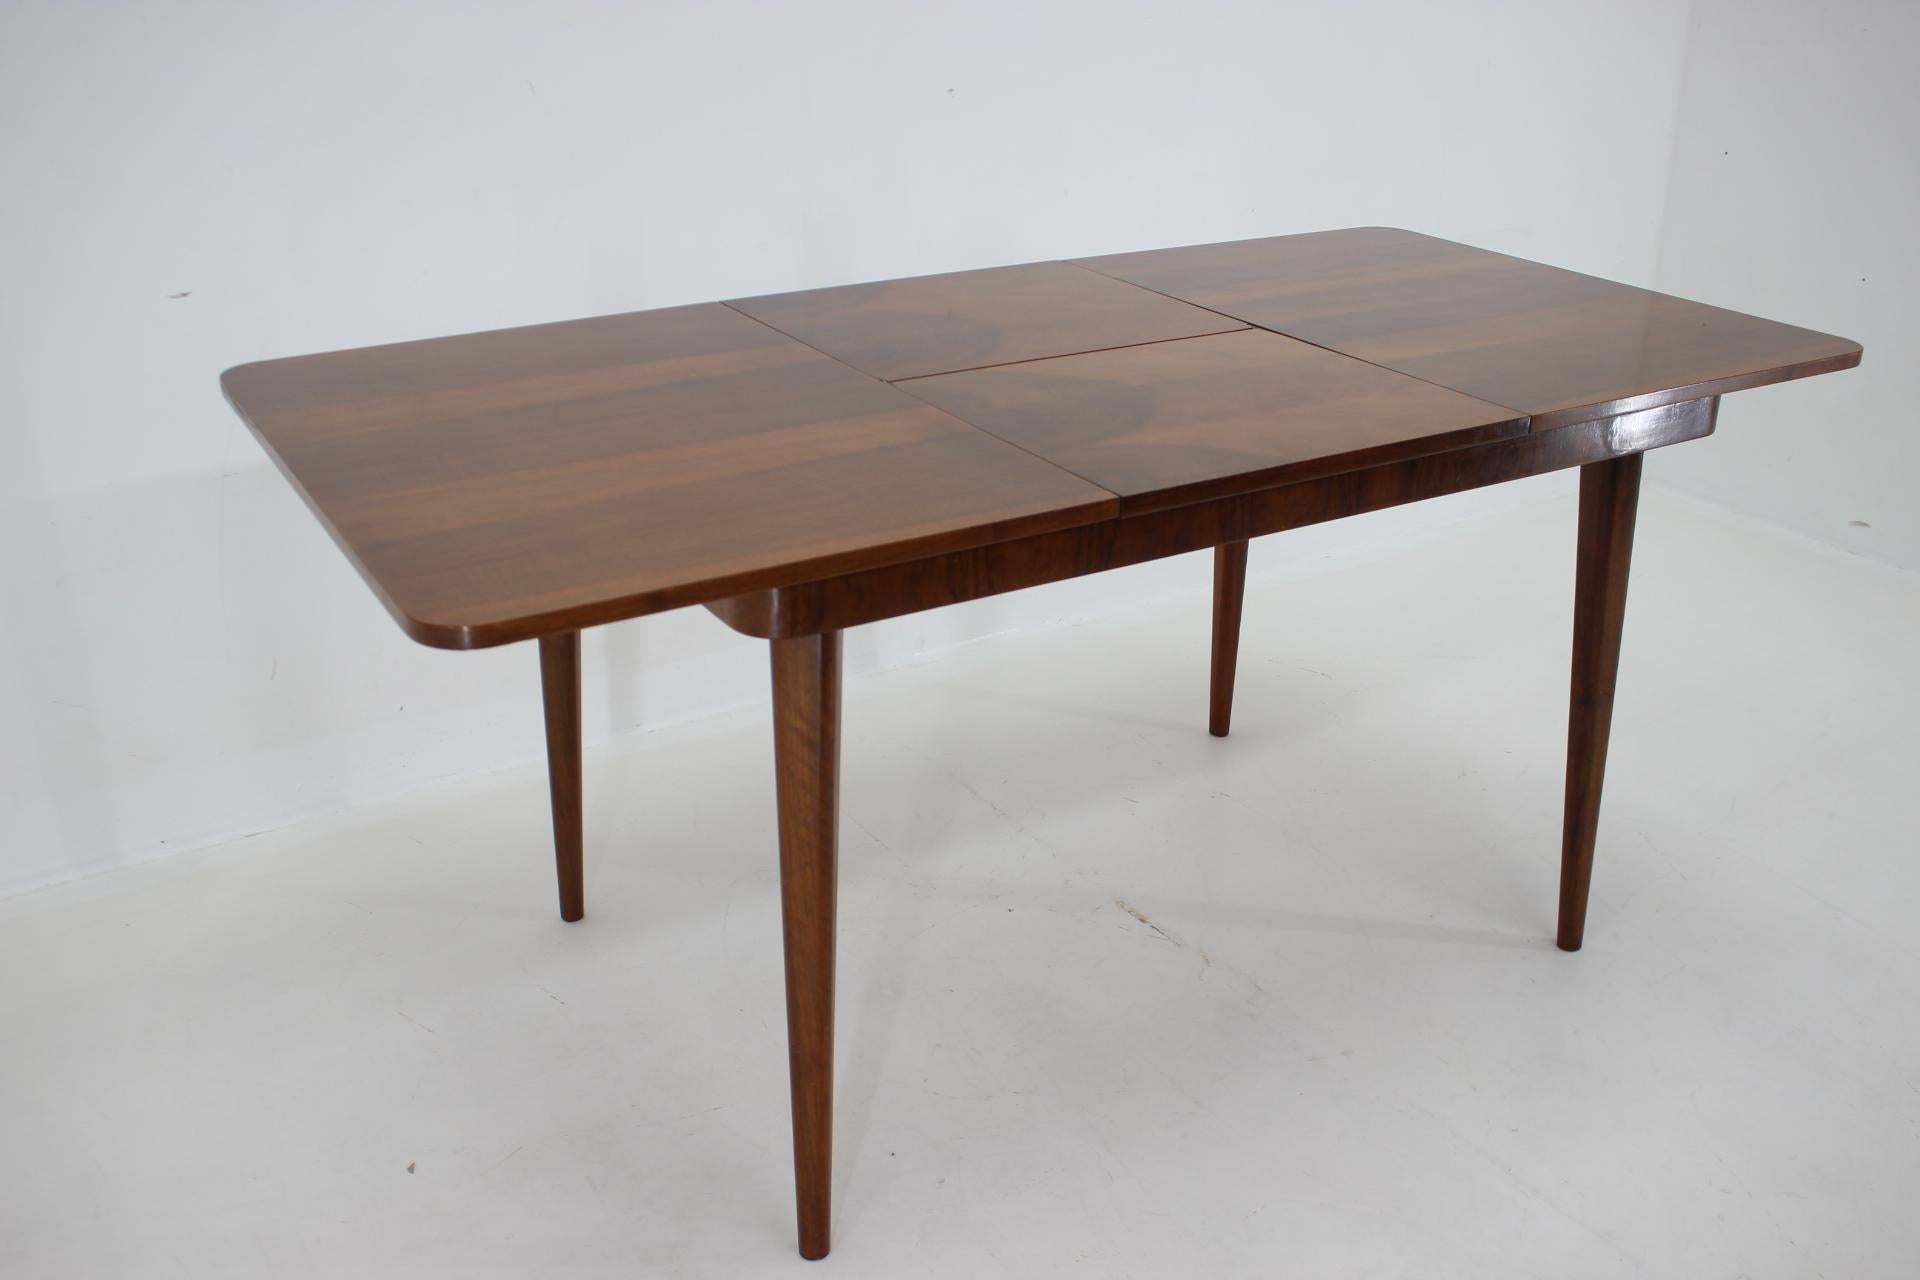 1950s Extendable Dining Table in Walnut by UP zavody, Czechoslovakia For Sale 7